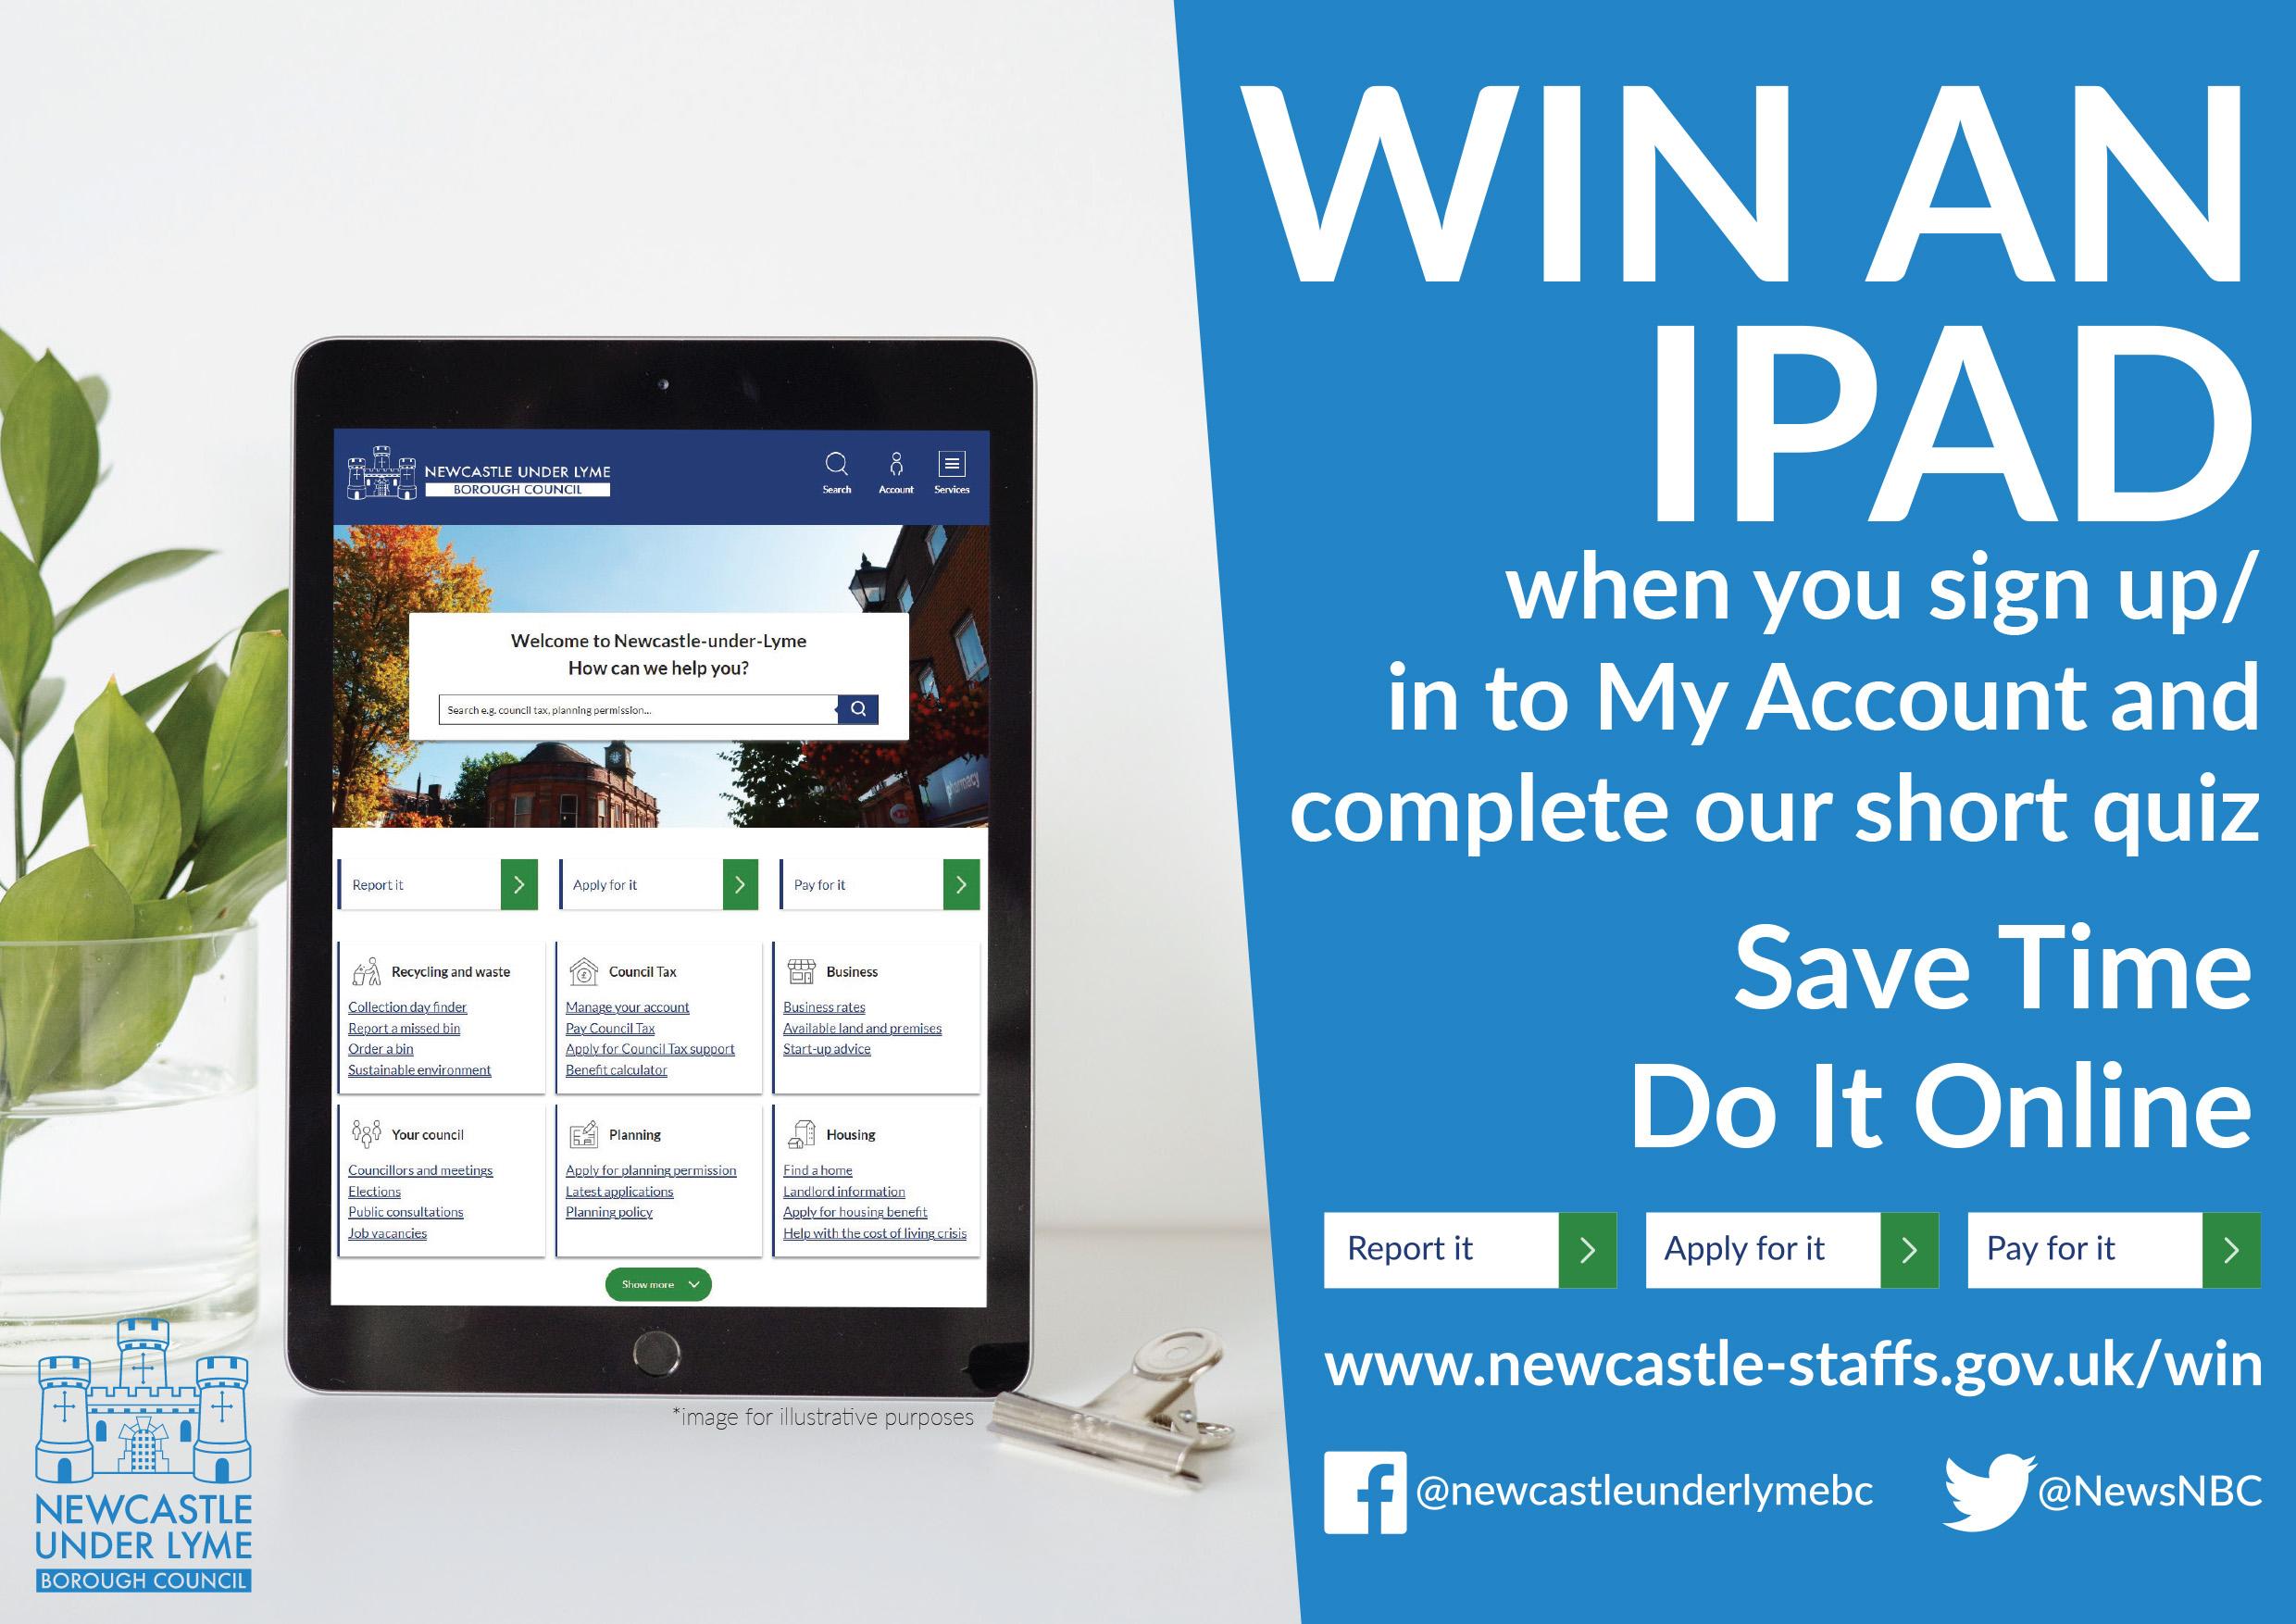 Apple iPad, competition, giveaway, Council, digital, My Account, online, website, save time do it online